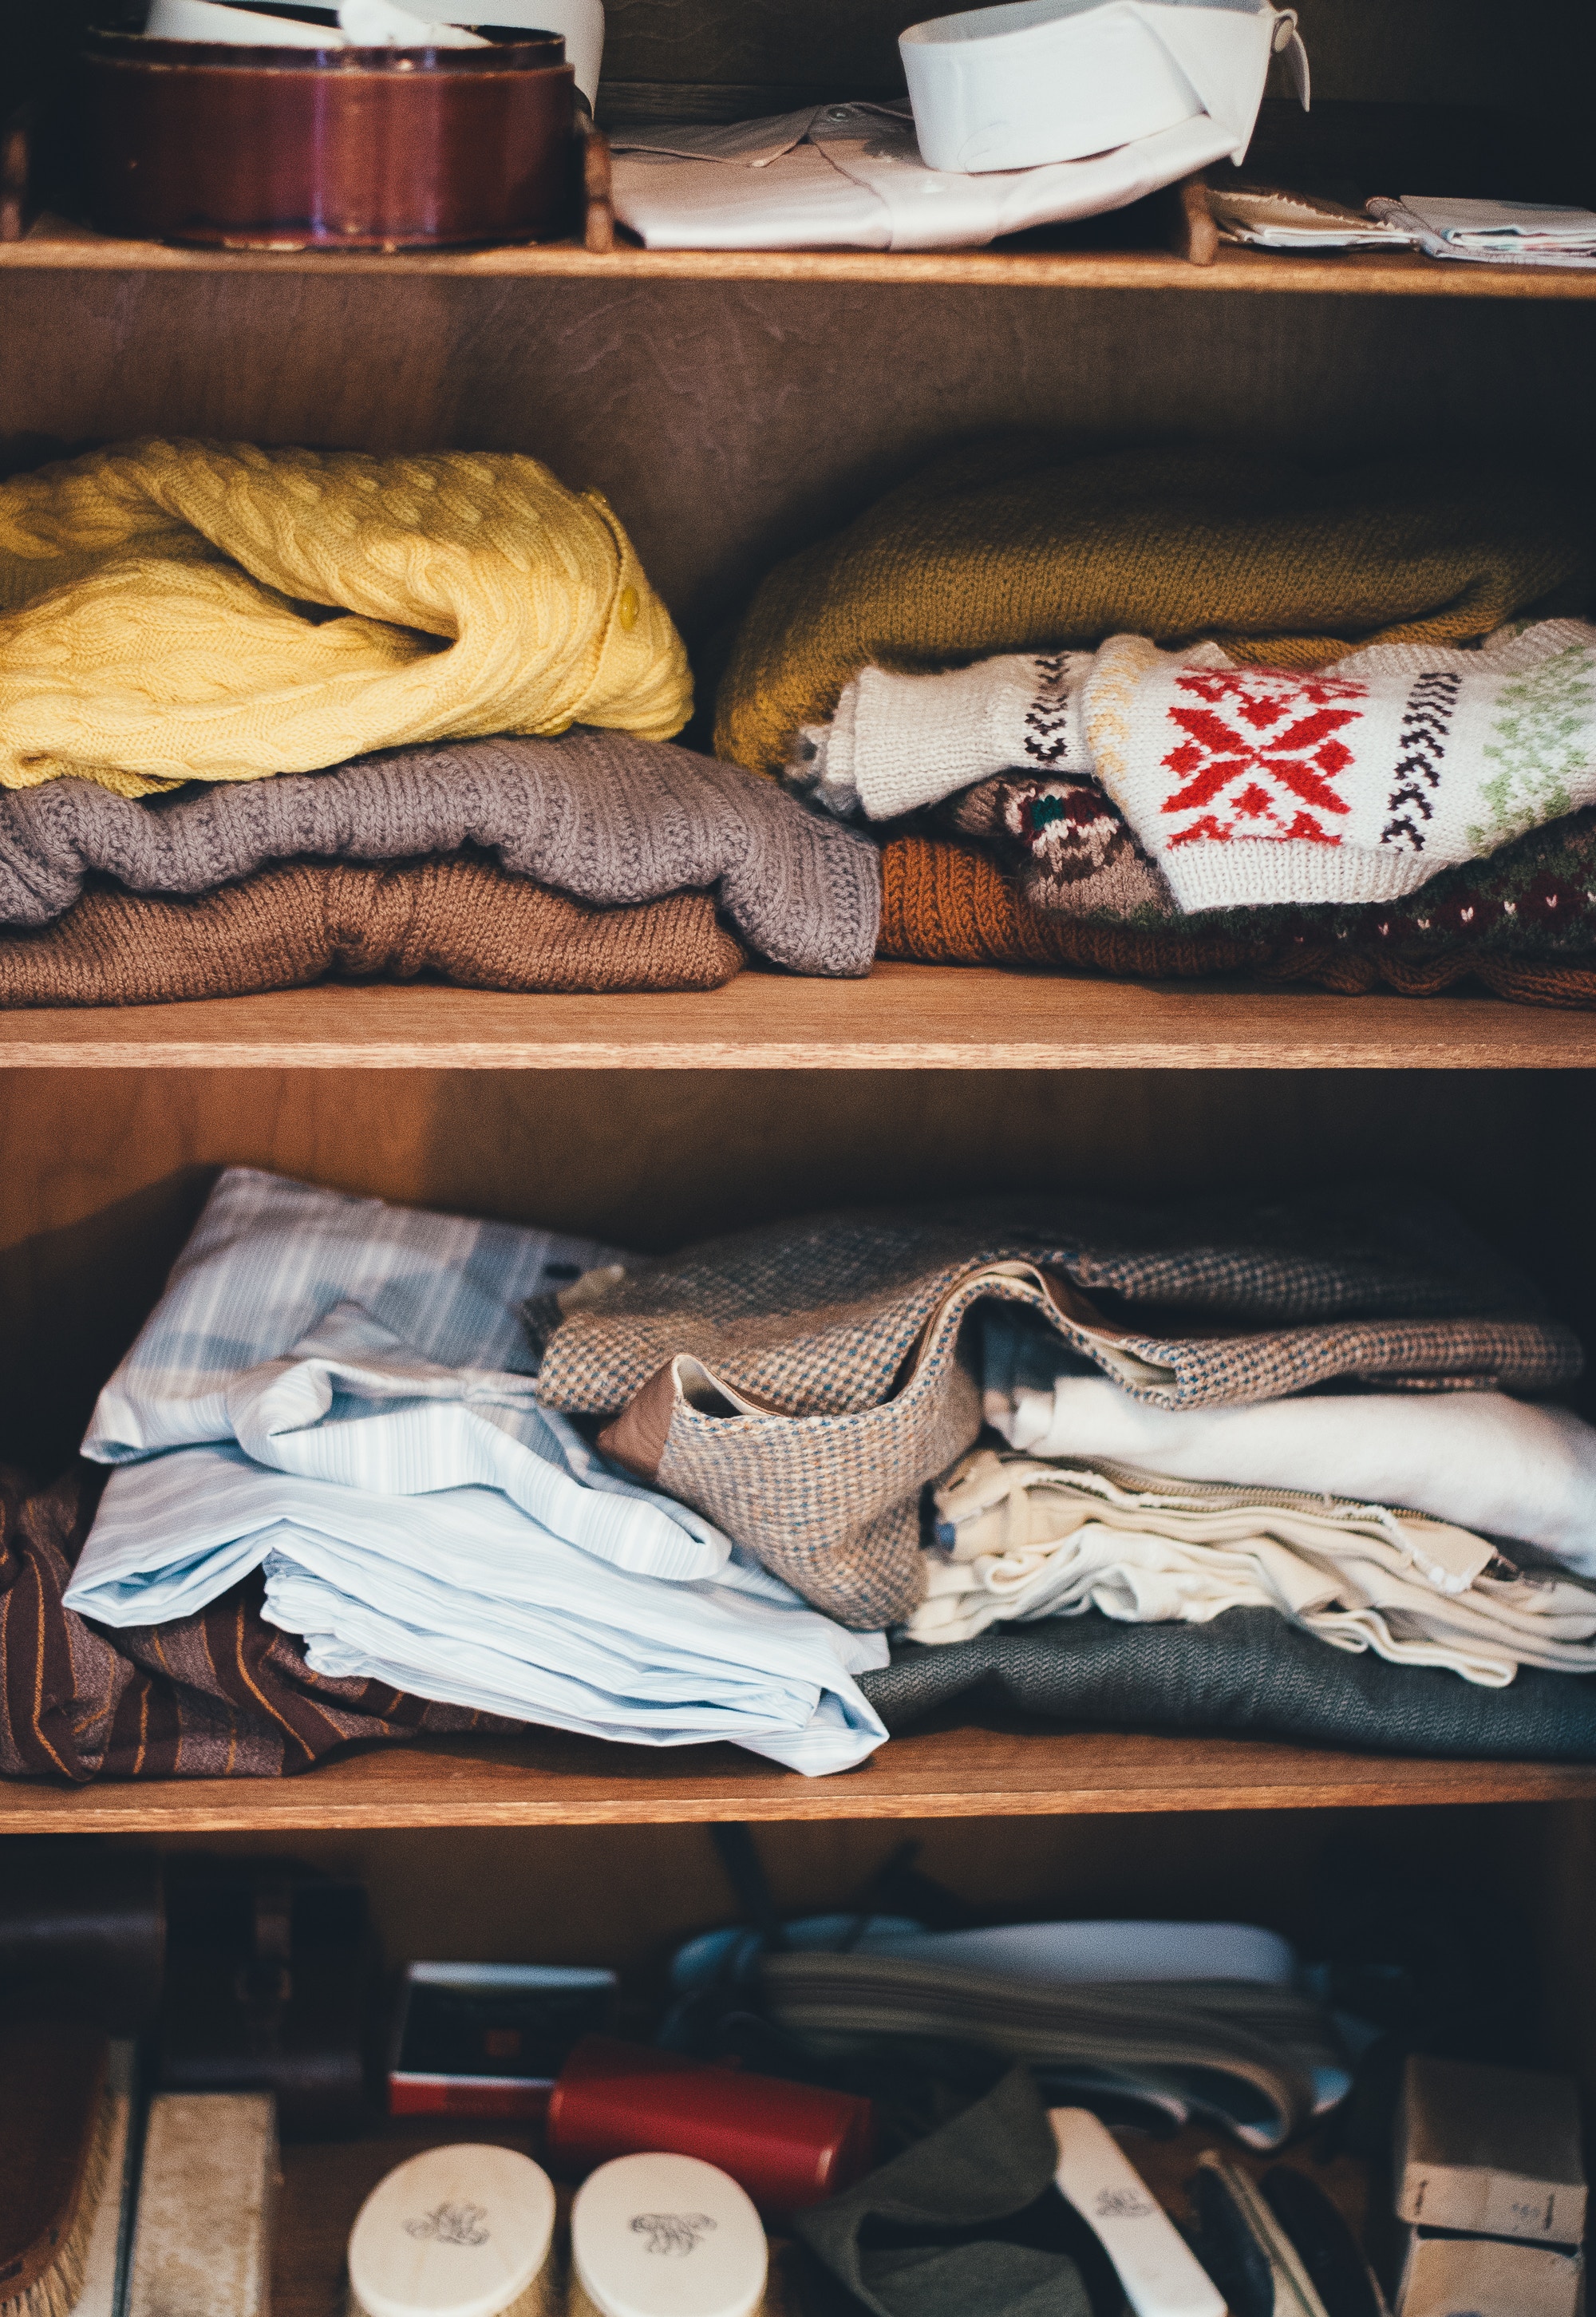 Clothes are relatively easy for most people to let go of